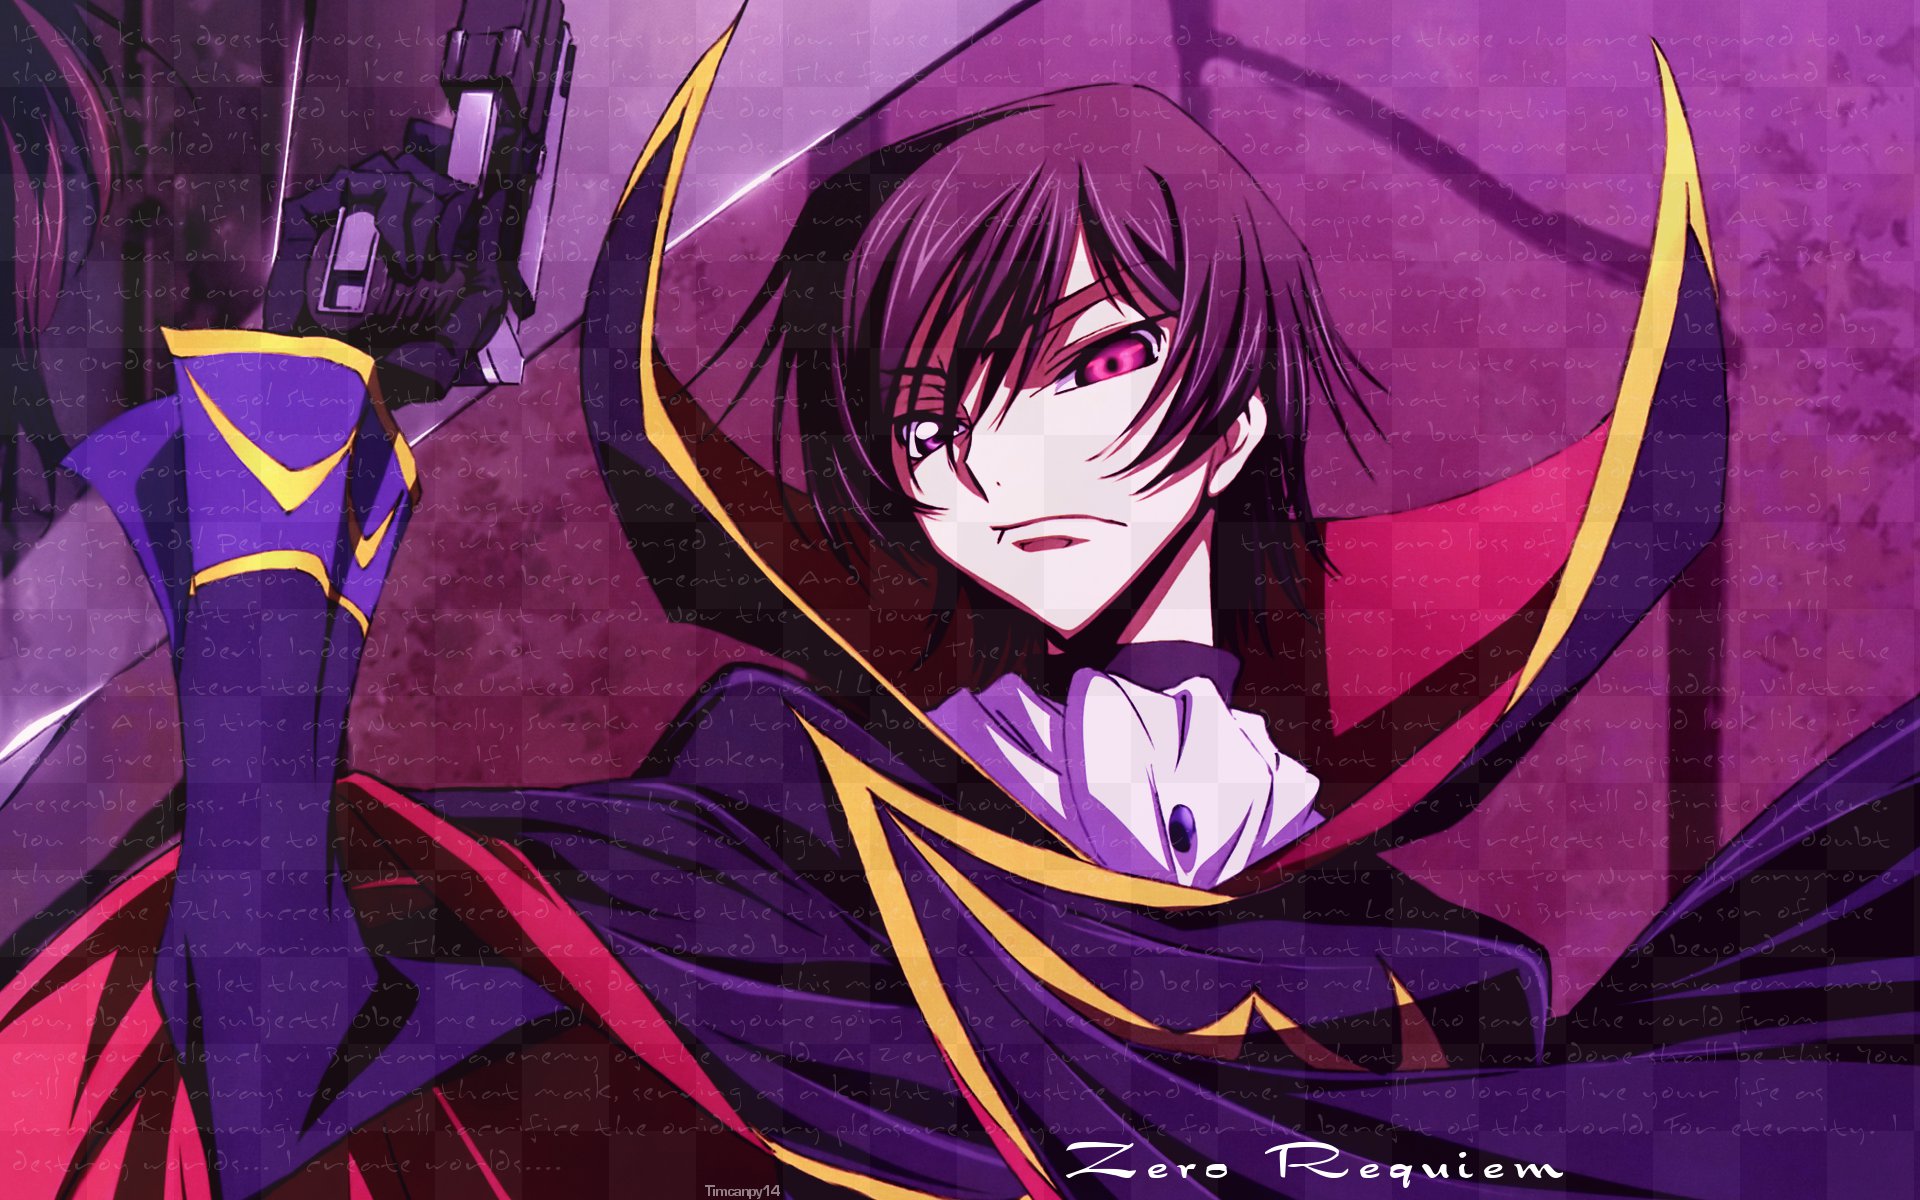 Code Geass Lelouch iPhone Wallpapers Free Download